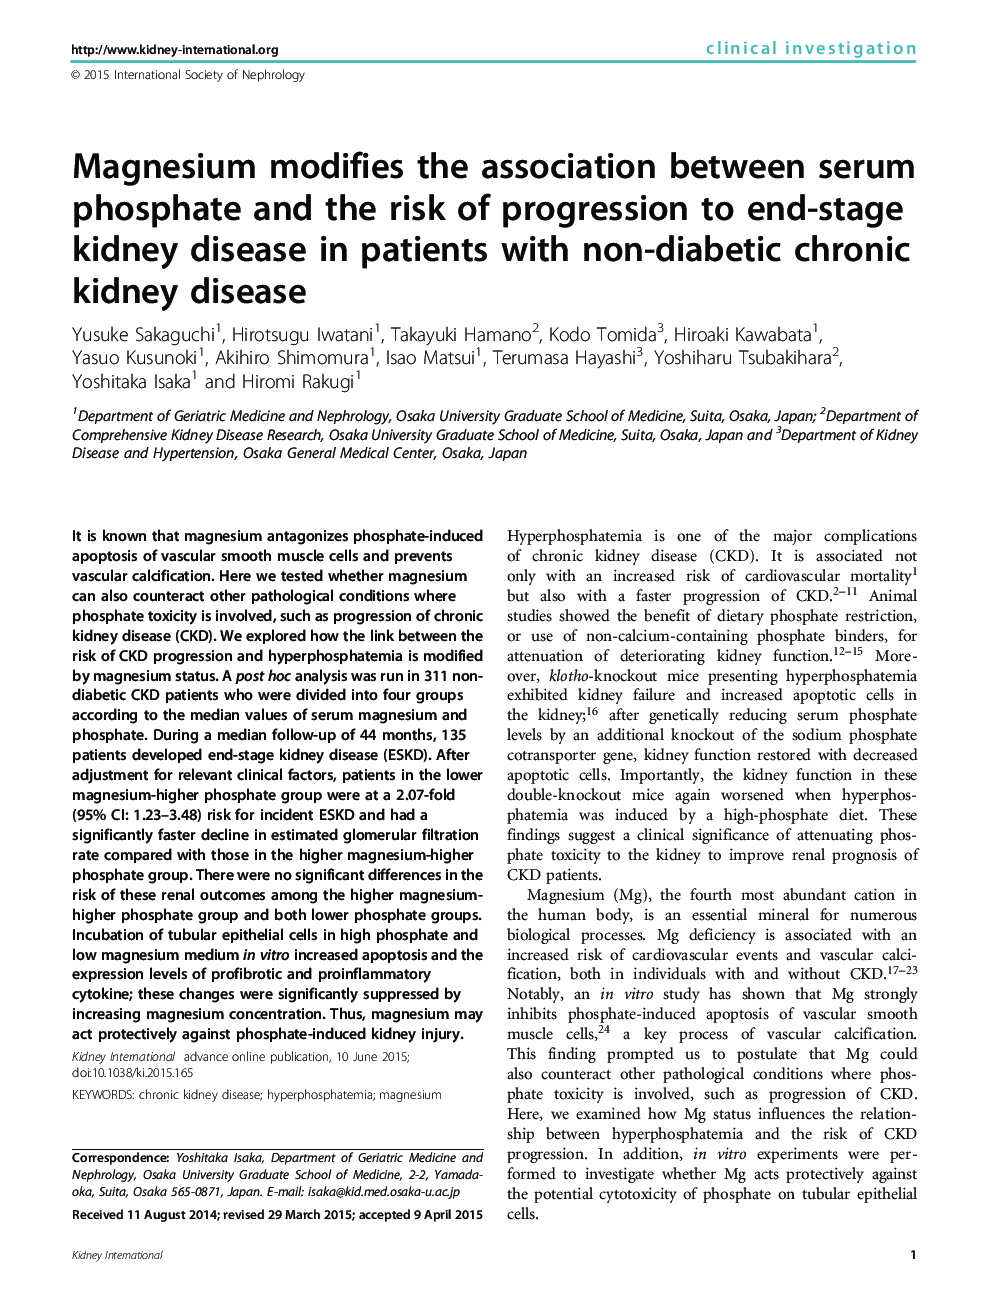 Magnesium modifies the association between serum phosphate and the risk of progression to end-stage kidney disease in patients with non-diabetic chronic kidney disease